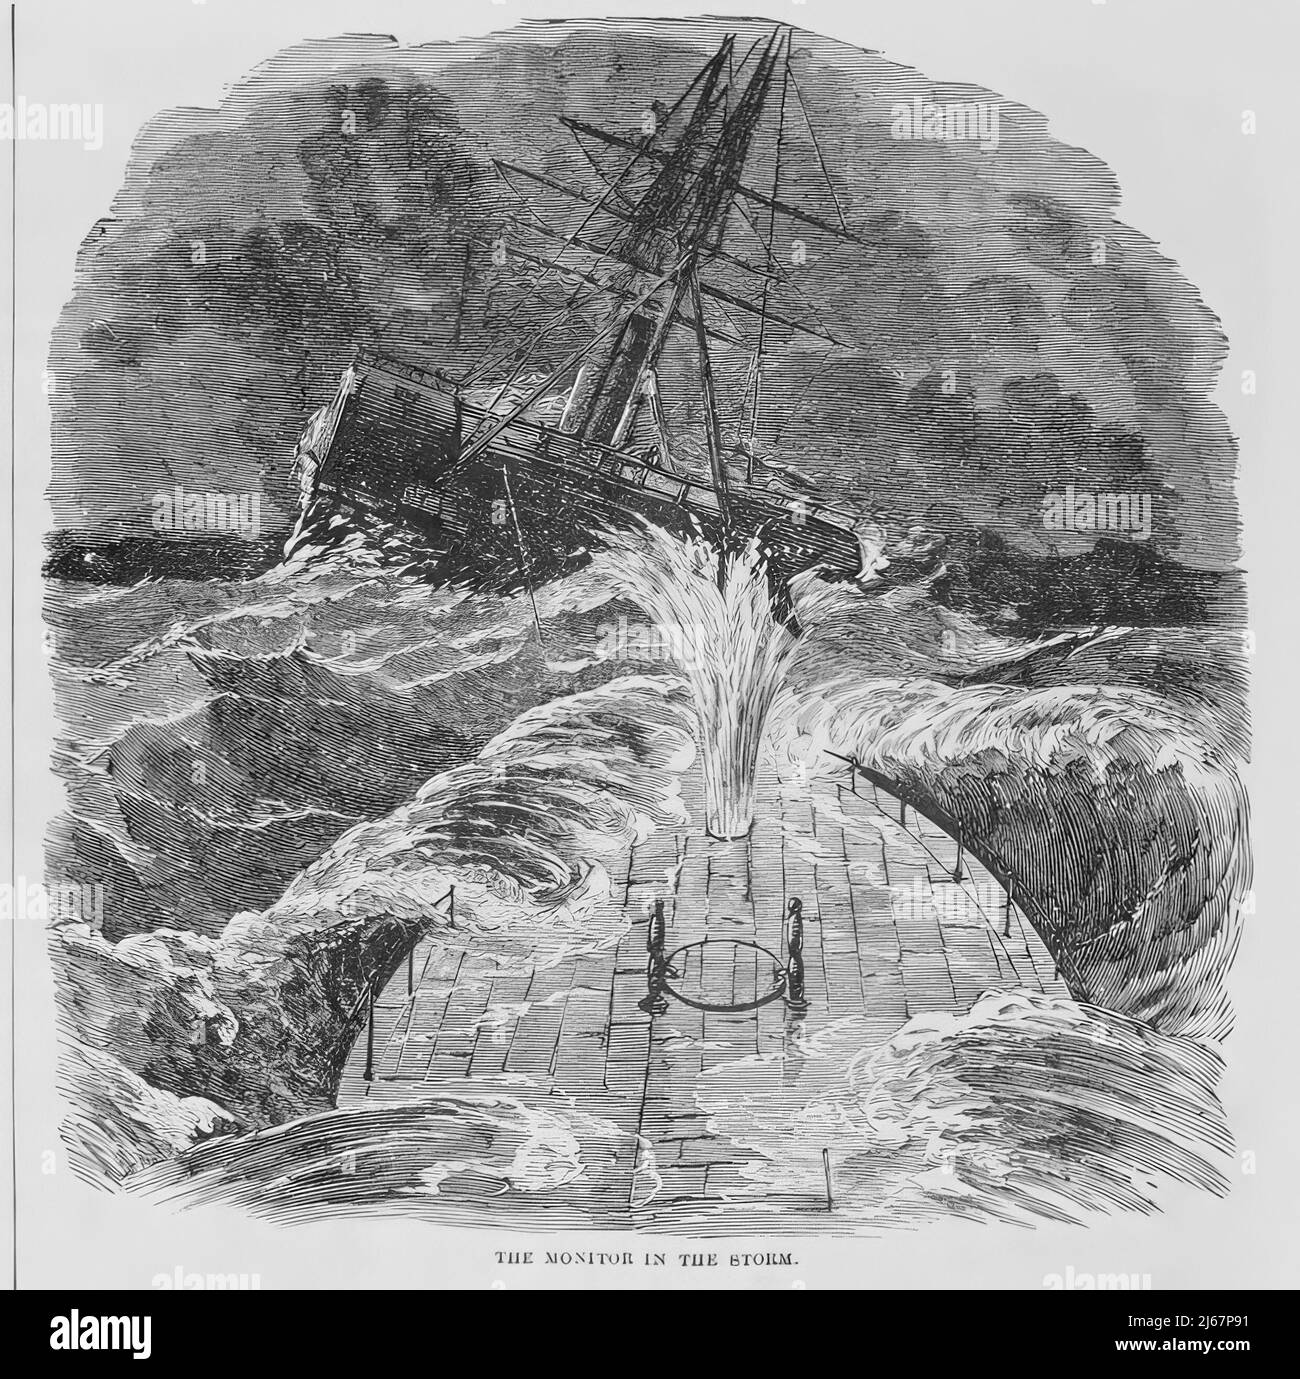 The USS Monitor in the Storm, December 1862, in the American Civil War. 19th century illustration Stock Photo